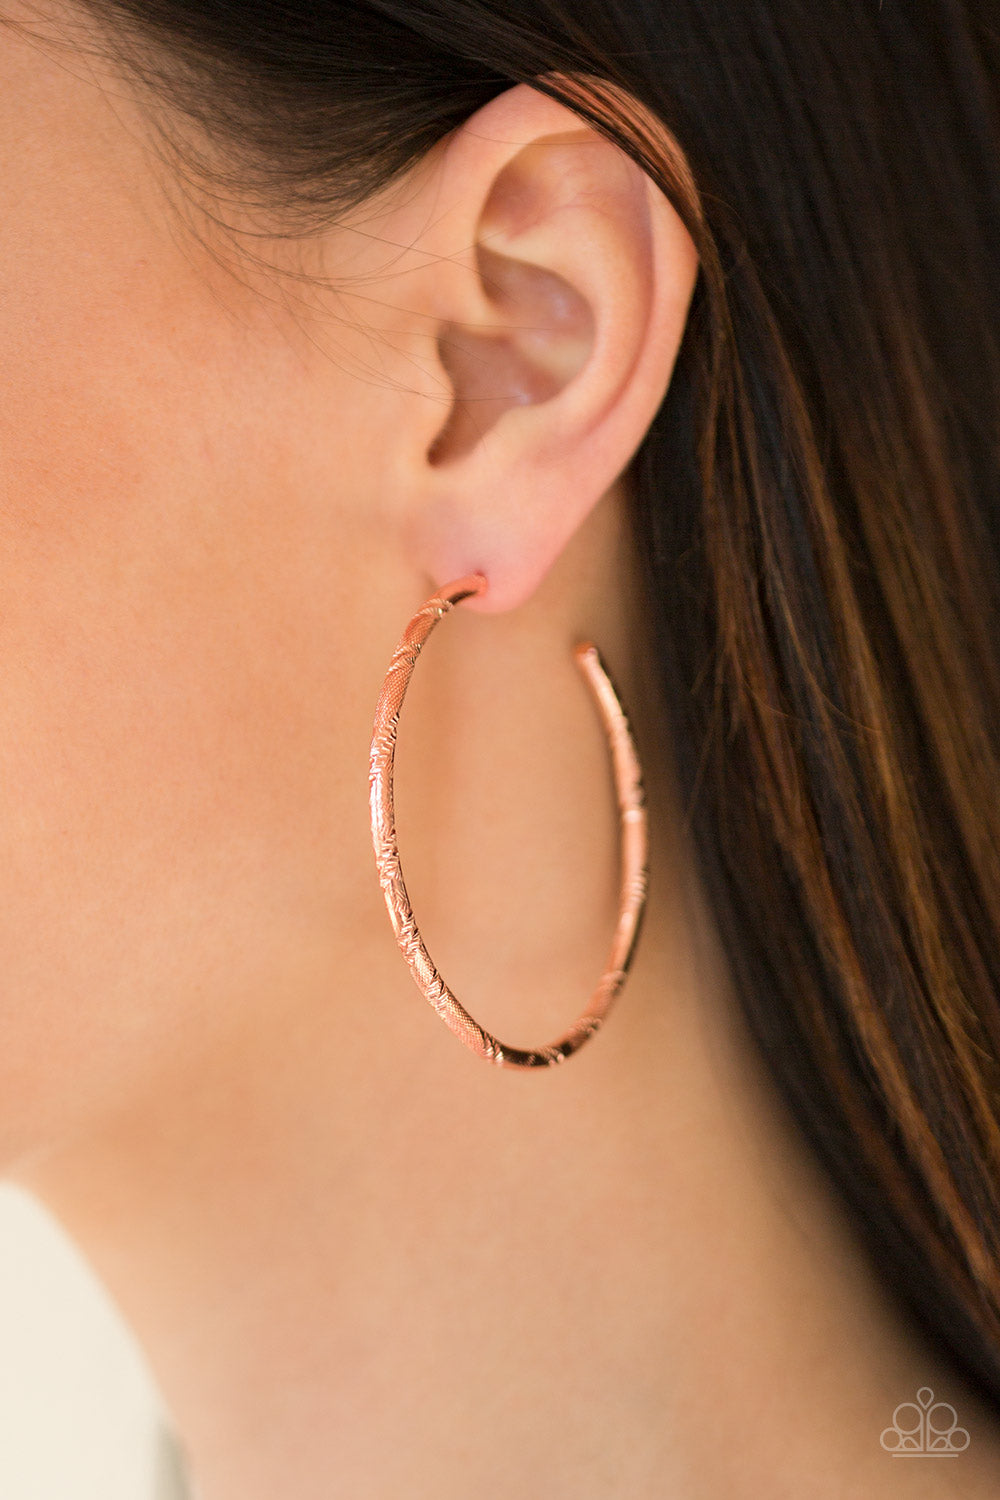 Etched in ribbons of diamond-cut shimmer, a shiny copper hoop curls around the ear for a classic look. Earring attaches to a standard post fitting. Hoop measures 2 1/4